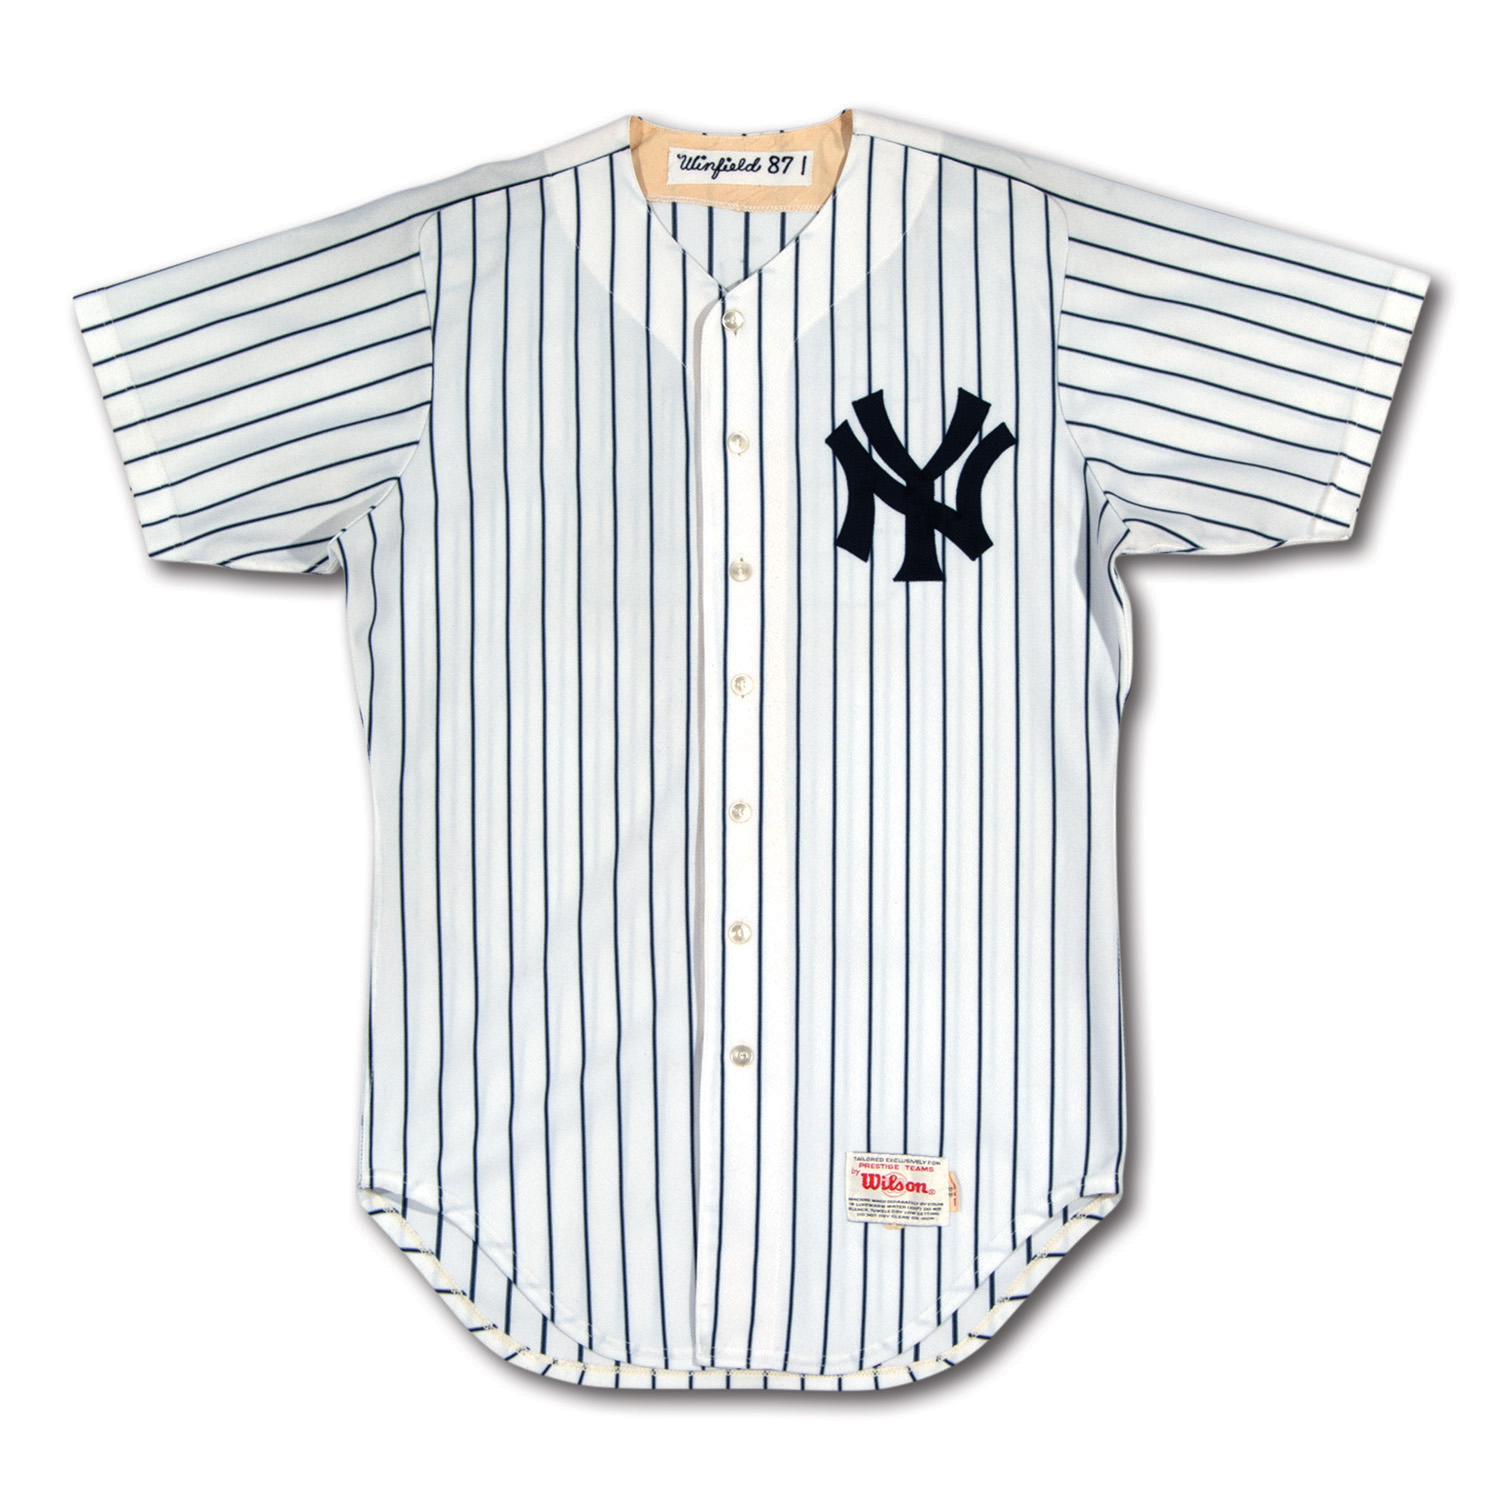 Dave Winfield signed Yankees pinstripe Jersey